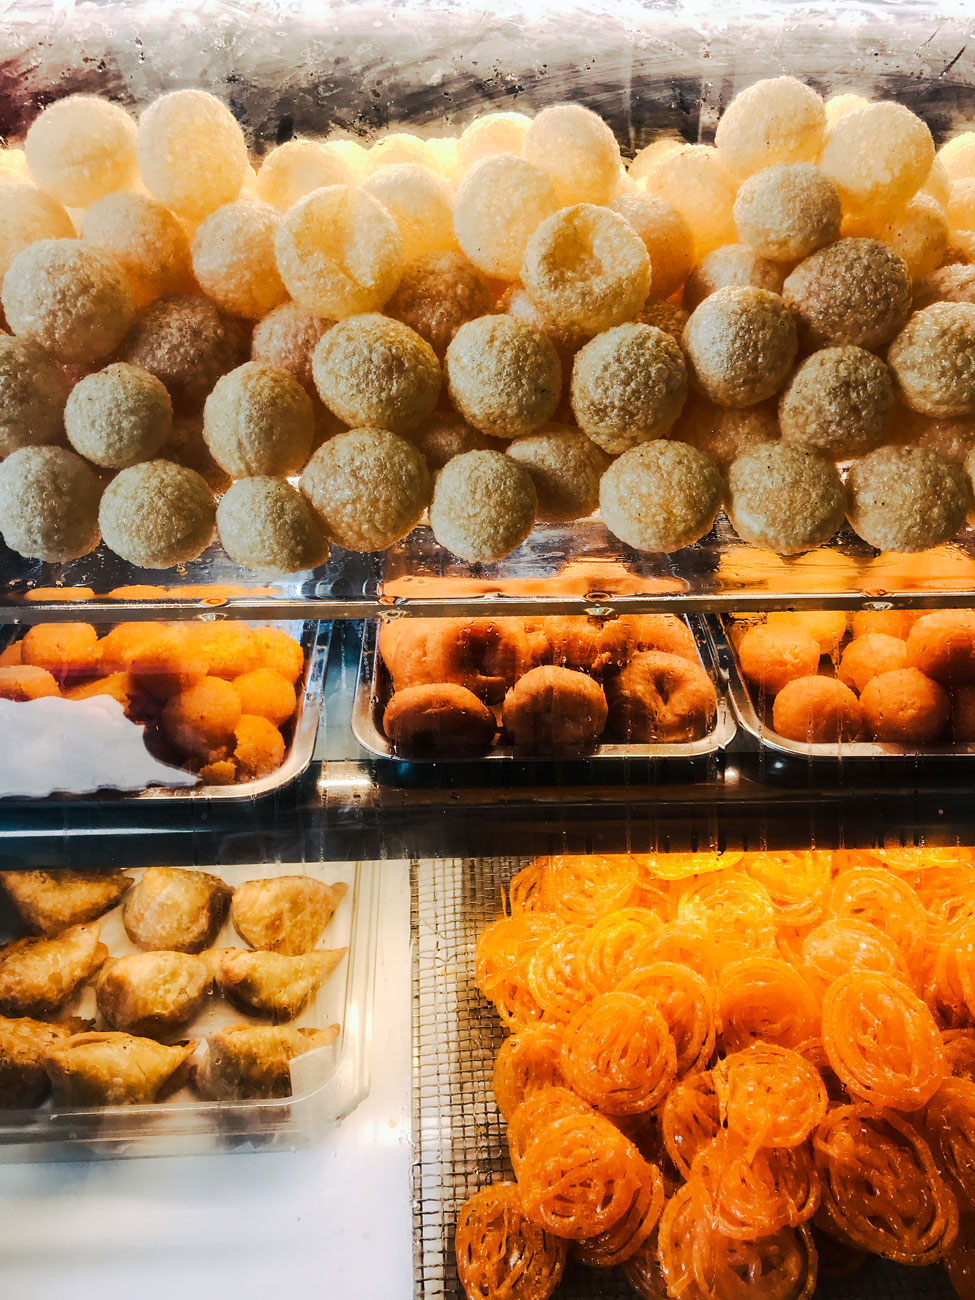 A display of sweets and puri, bite-sized deep-fried hollow dough balls.